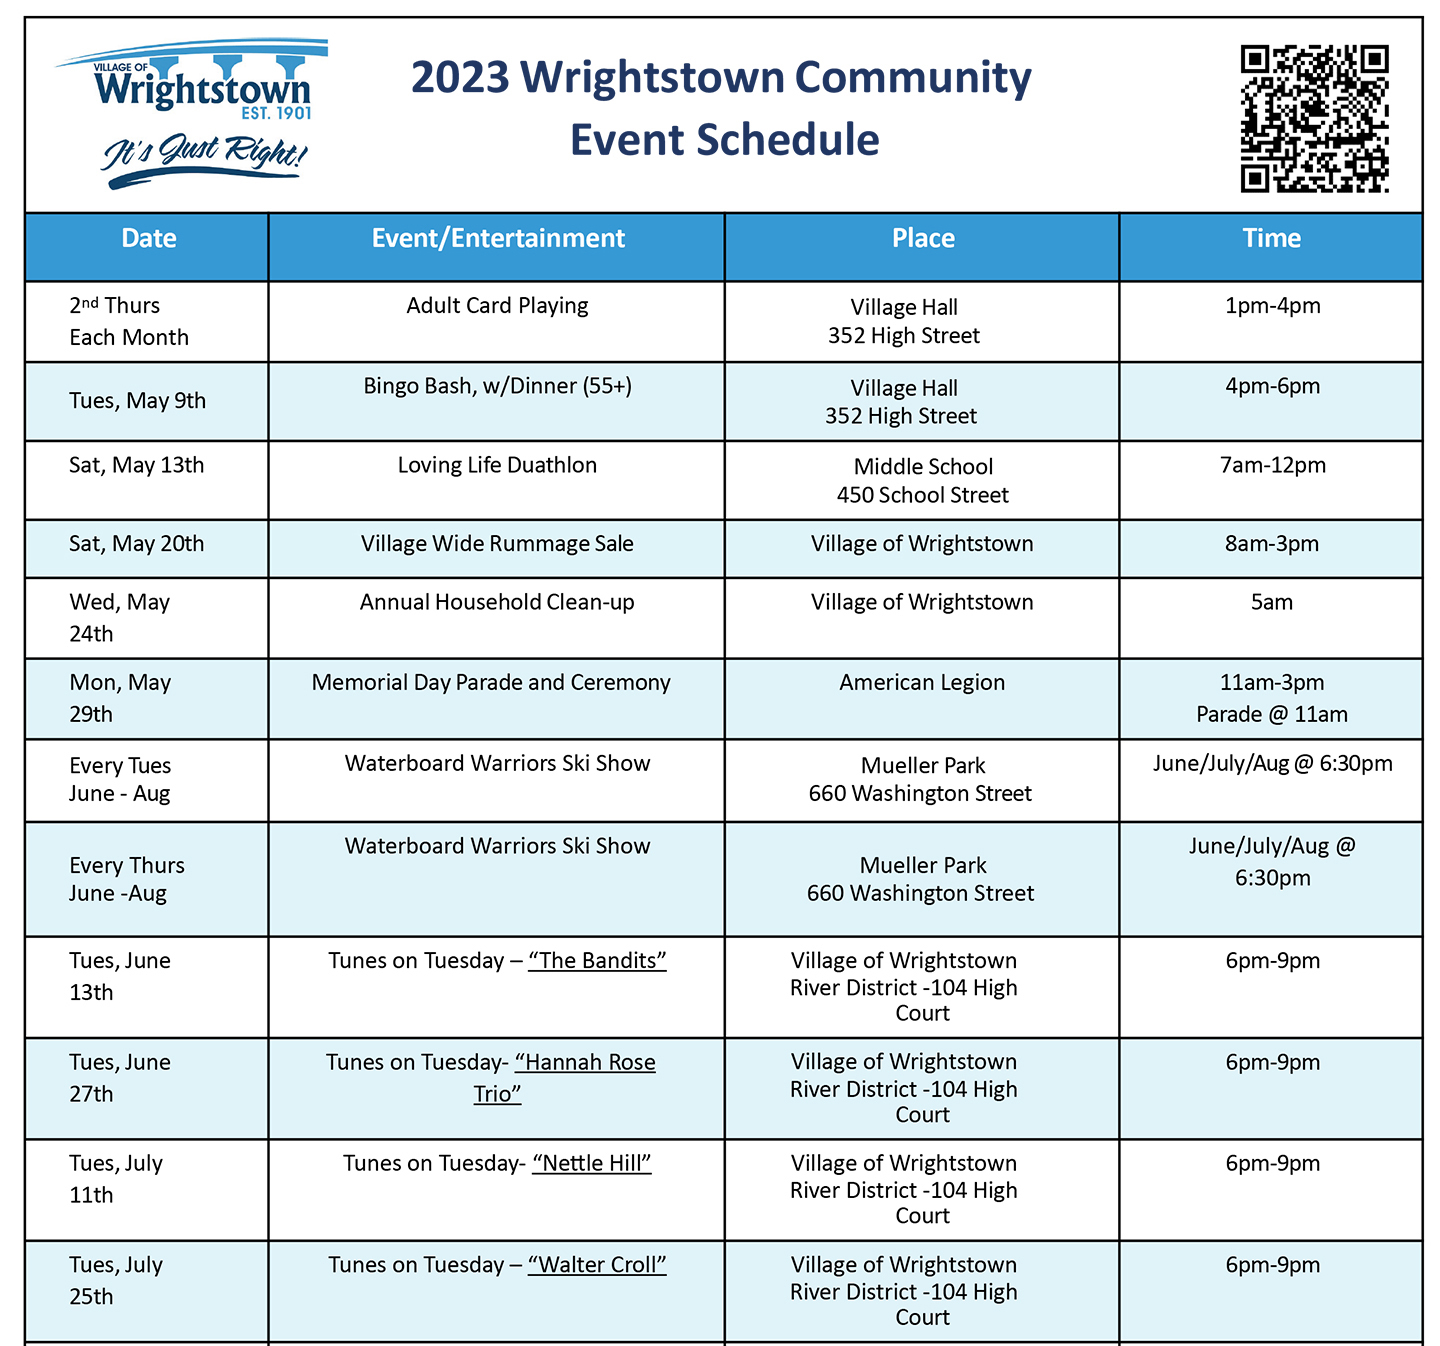 2023 wrightstown wi event schedule, things to do in the Fox Valley, tunes on tuesday, adult card playing, bingo bash, rummage sales, waterboard warriors ski show, movie in the park, memorial day parade, fall festival, tree light ceremony